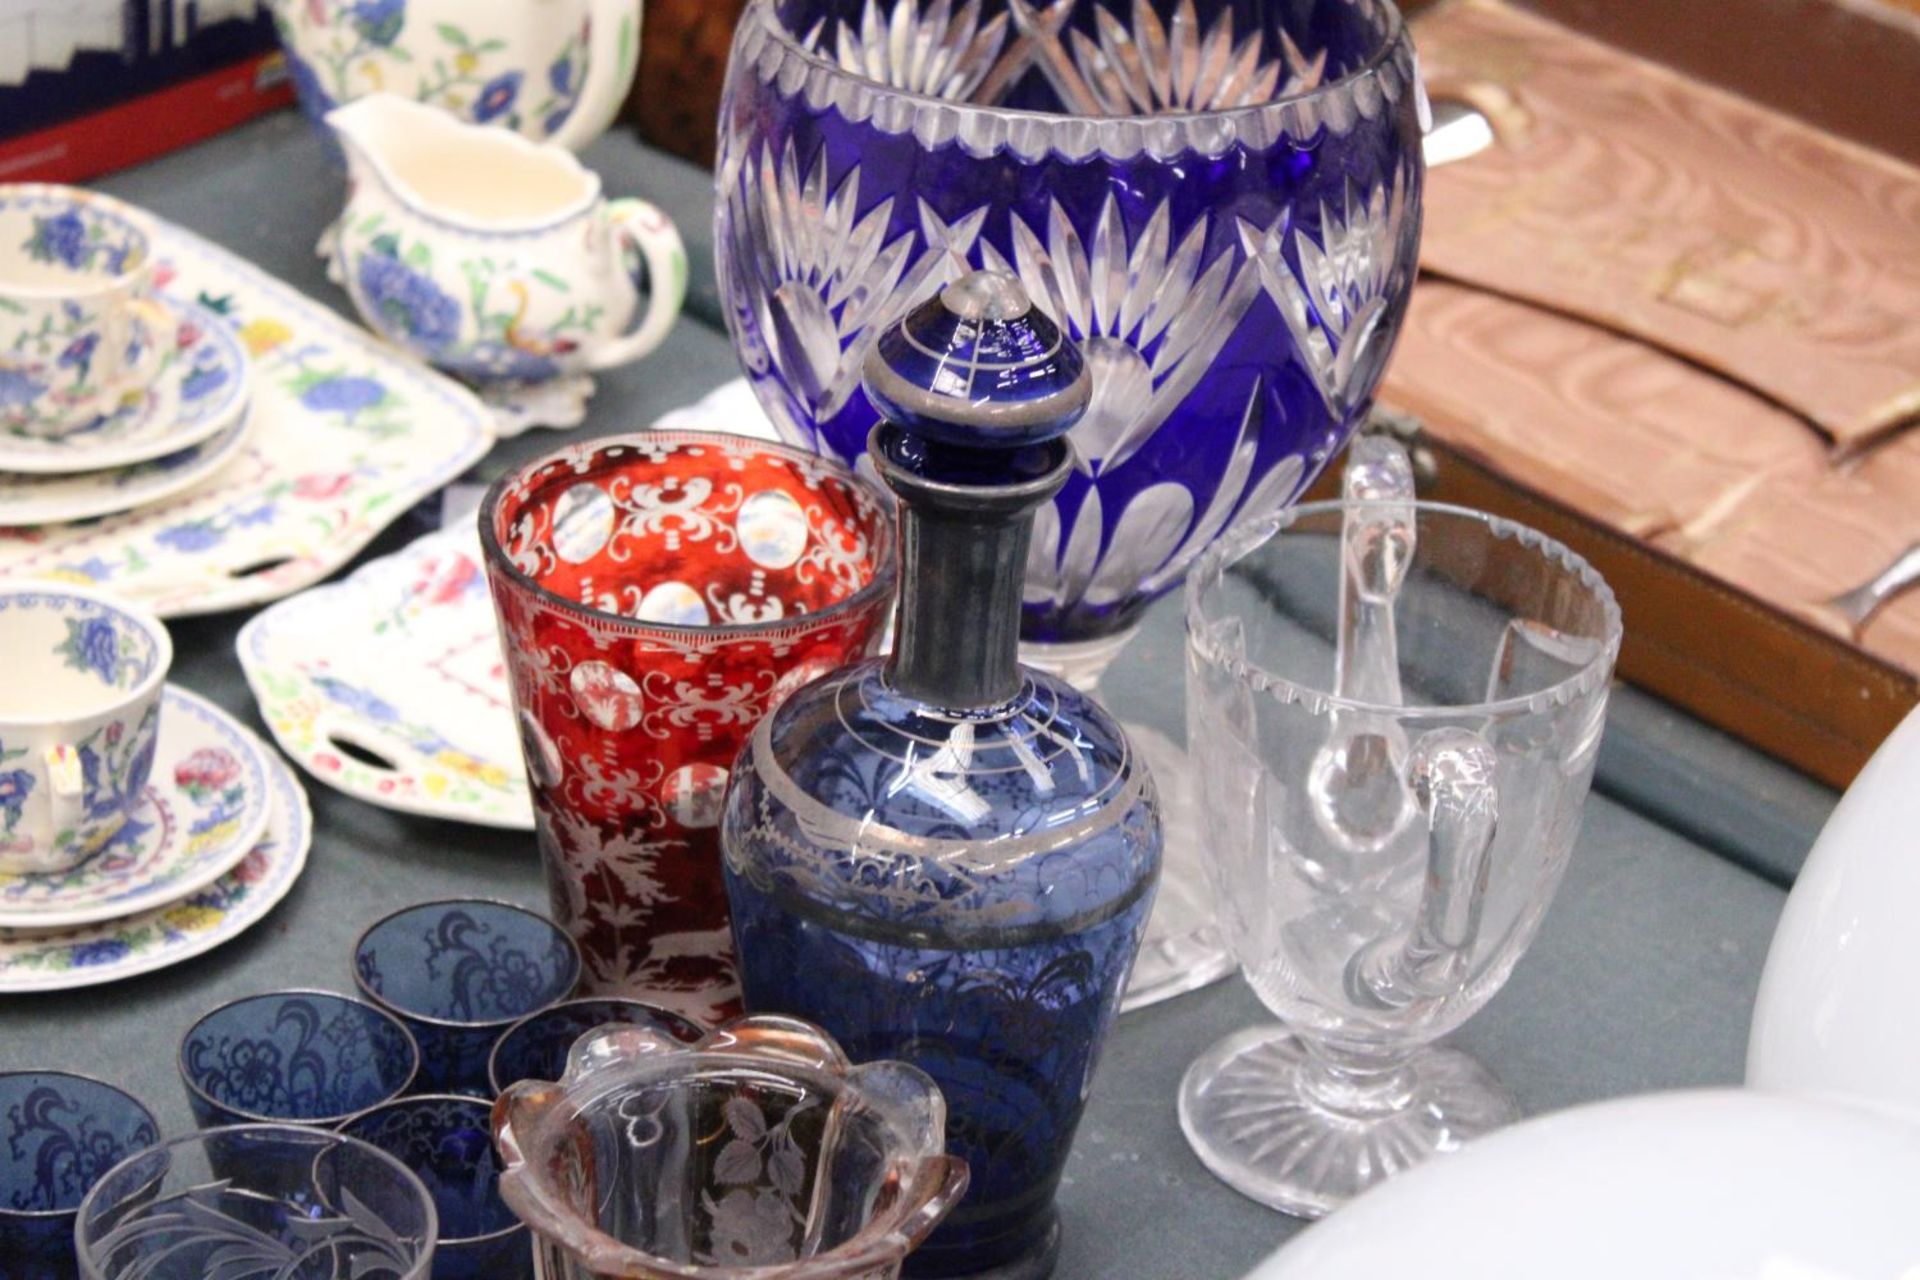 A MIXED LOT OF GLASSWARE TO INCLUDE A BLUE BOHEMIAN STYLE VASE, CRANBERRY JUG, SIX SHOT GLASSES ETC - Image 5 of 5